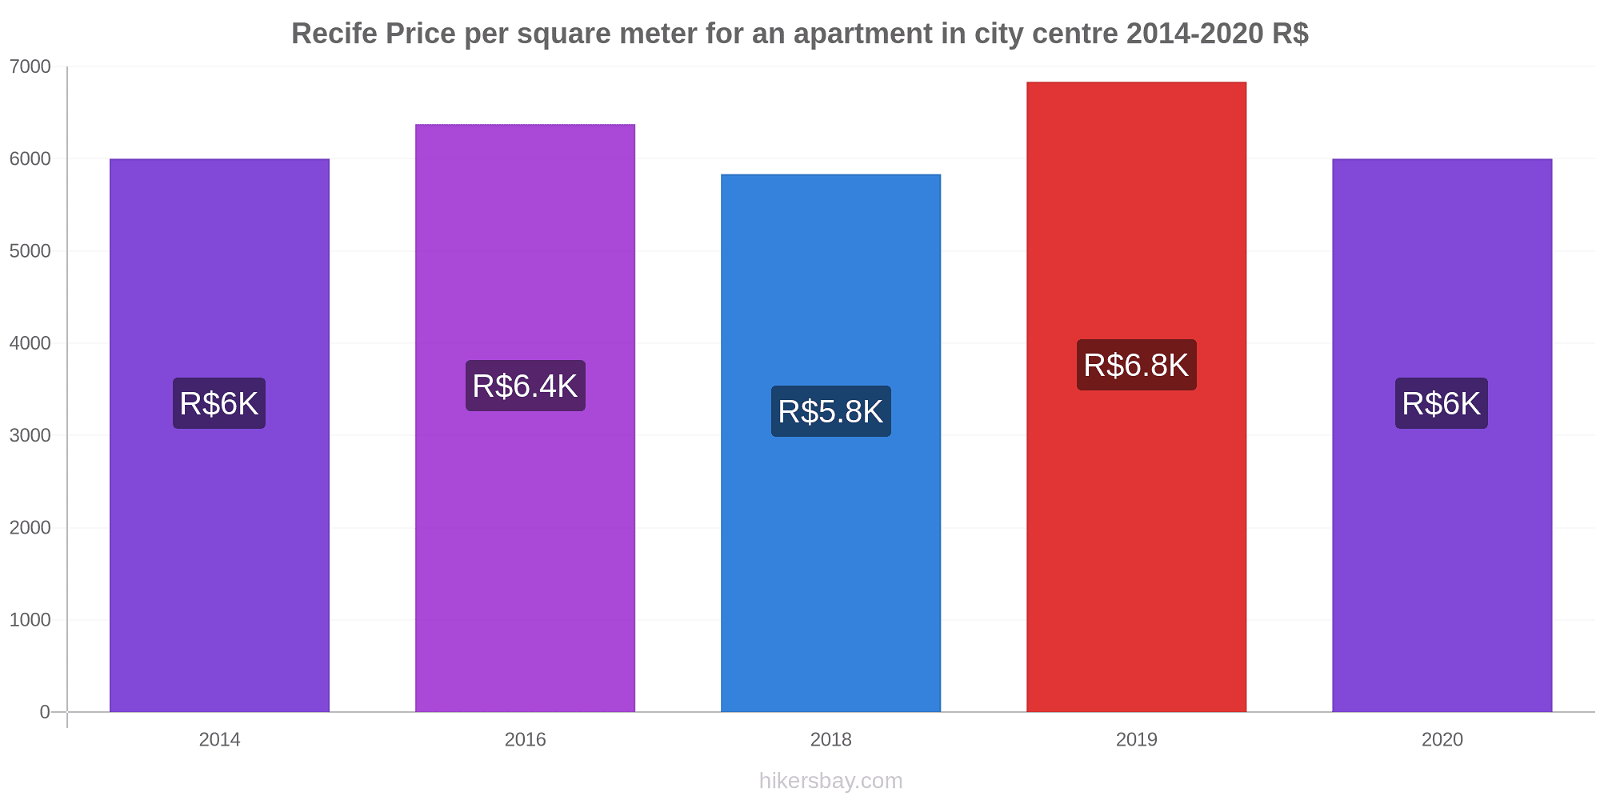 Recife price changes Price per square meter for an apartment in city centre hikersbay.com